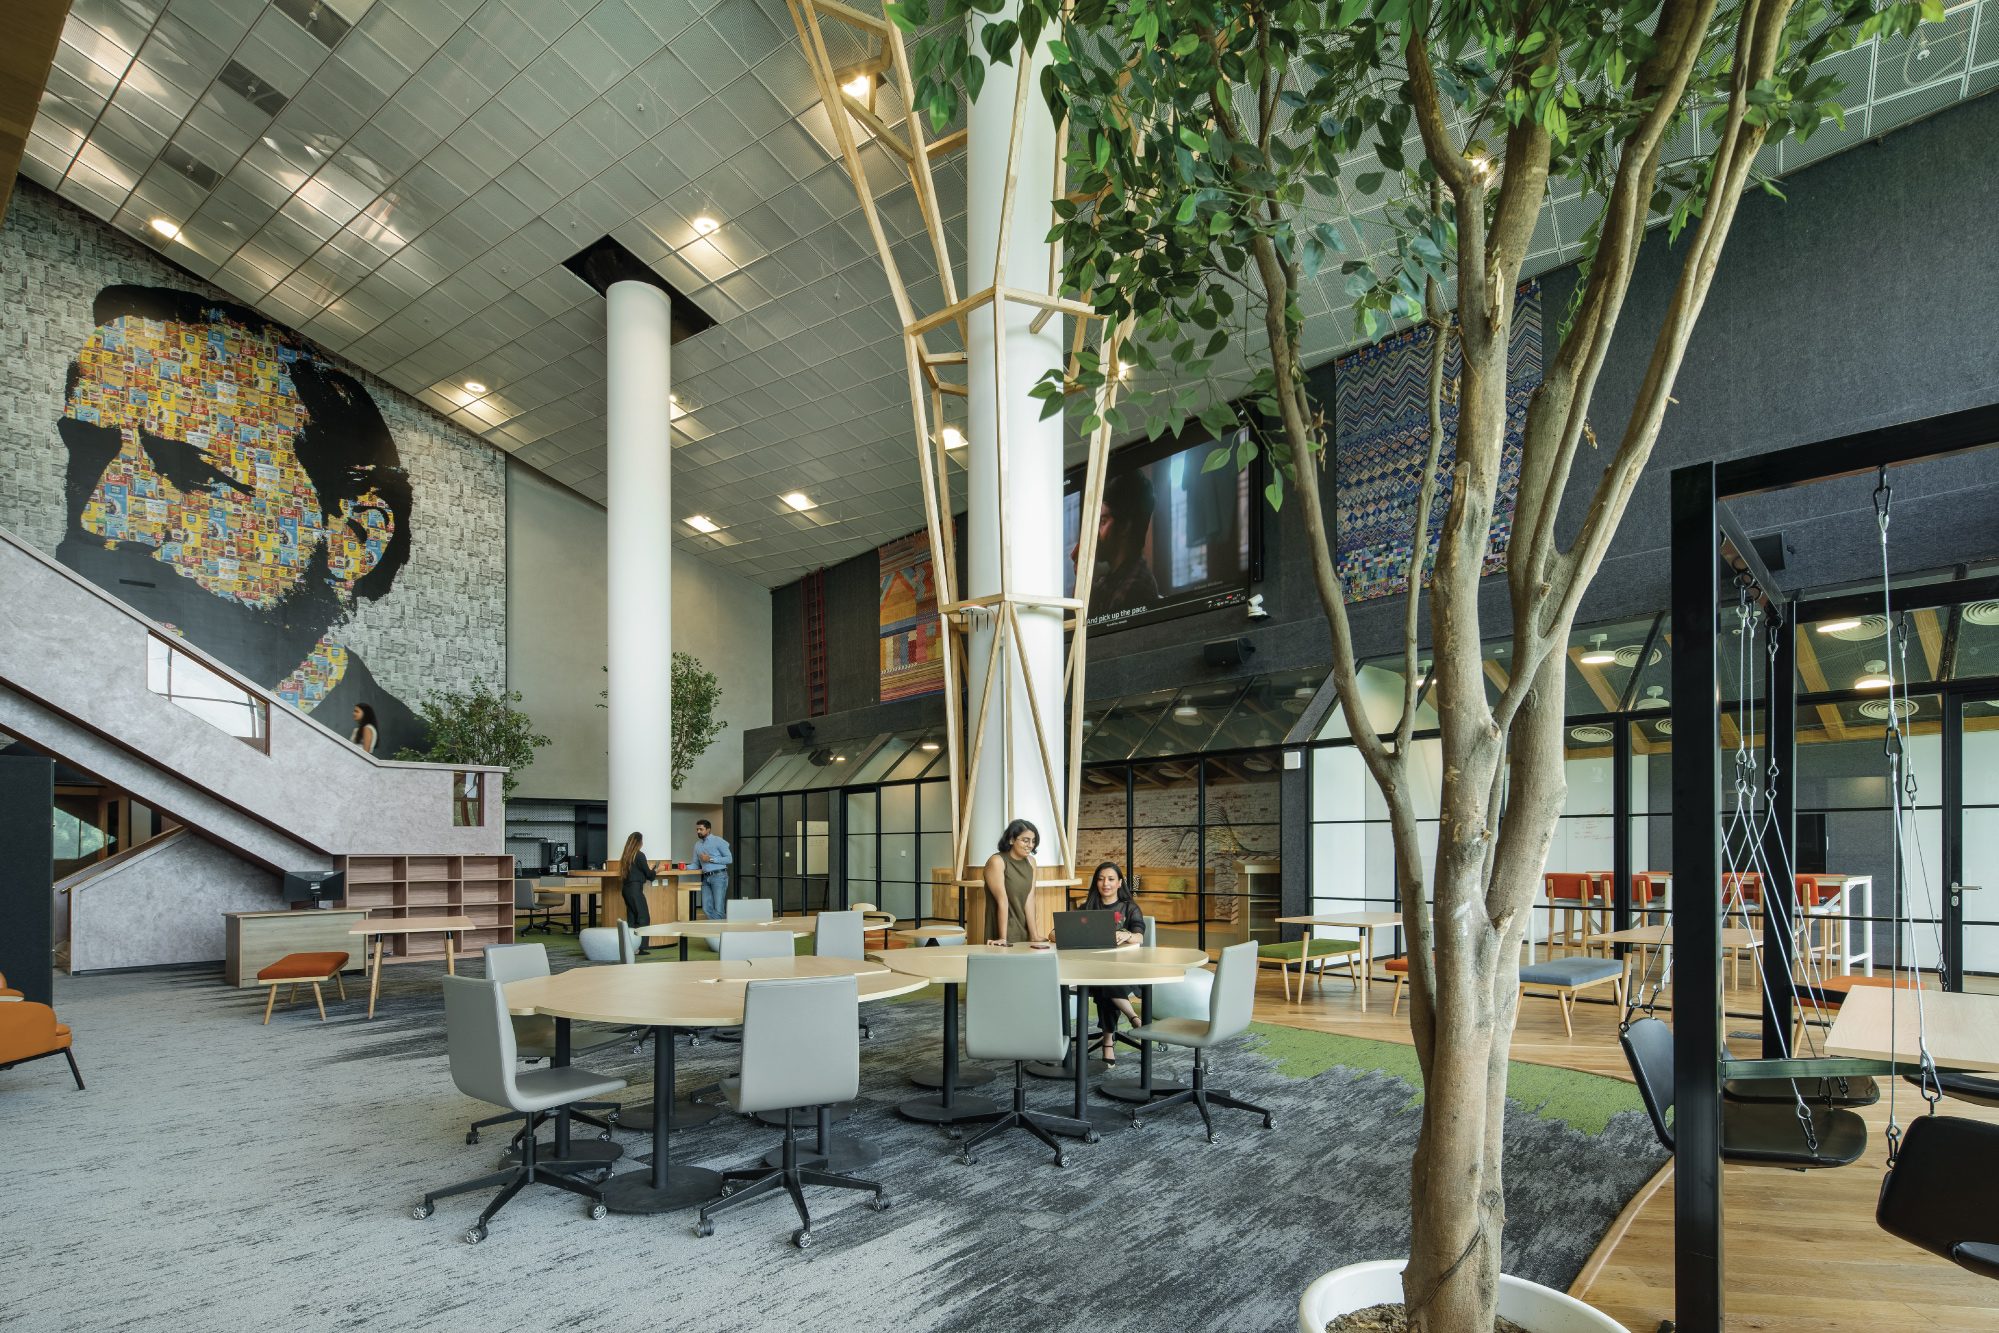 Nestle’s workplace - Office interiors receives sunlight and contains natural elements